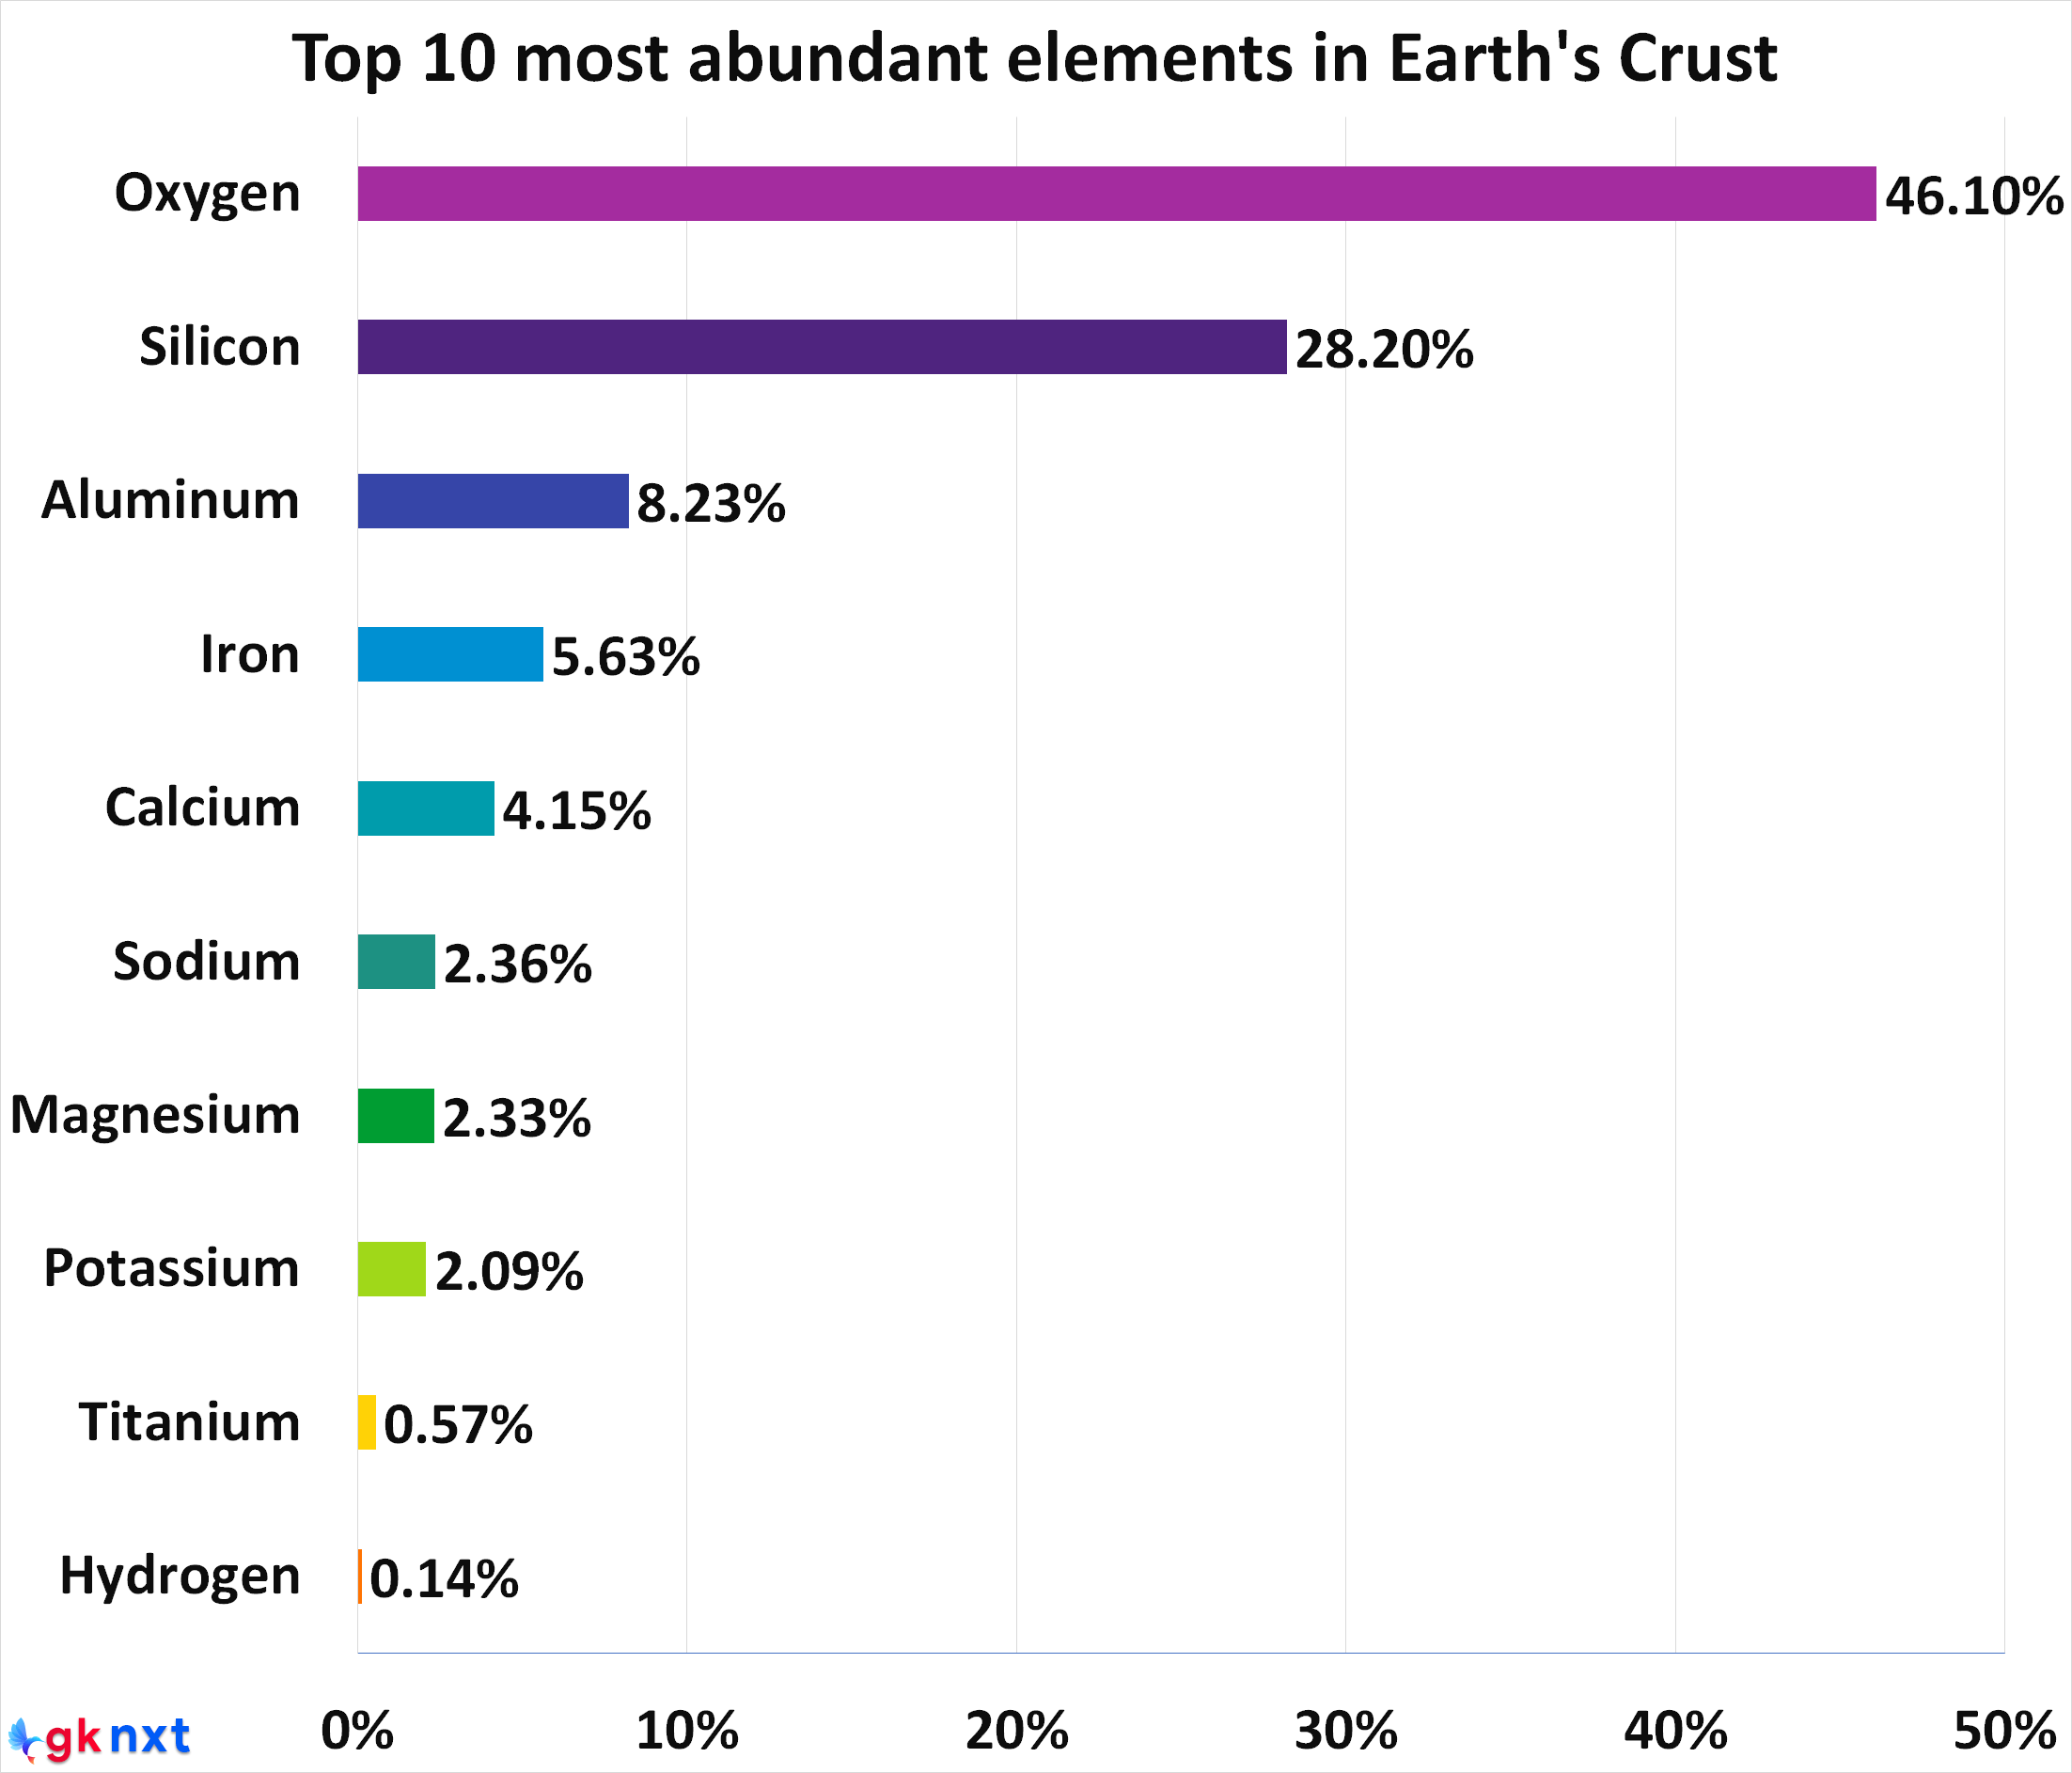 Top 10 most abundant elements in earth's crust